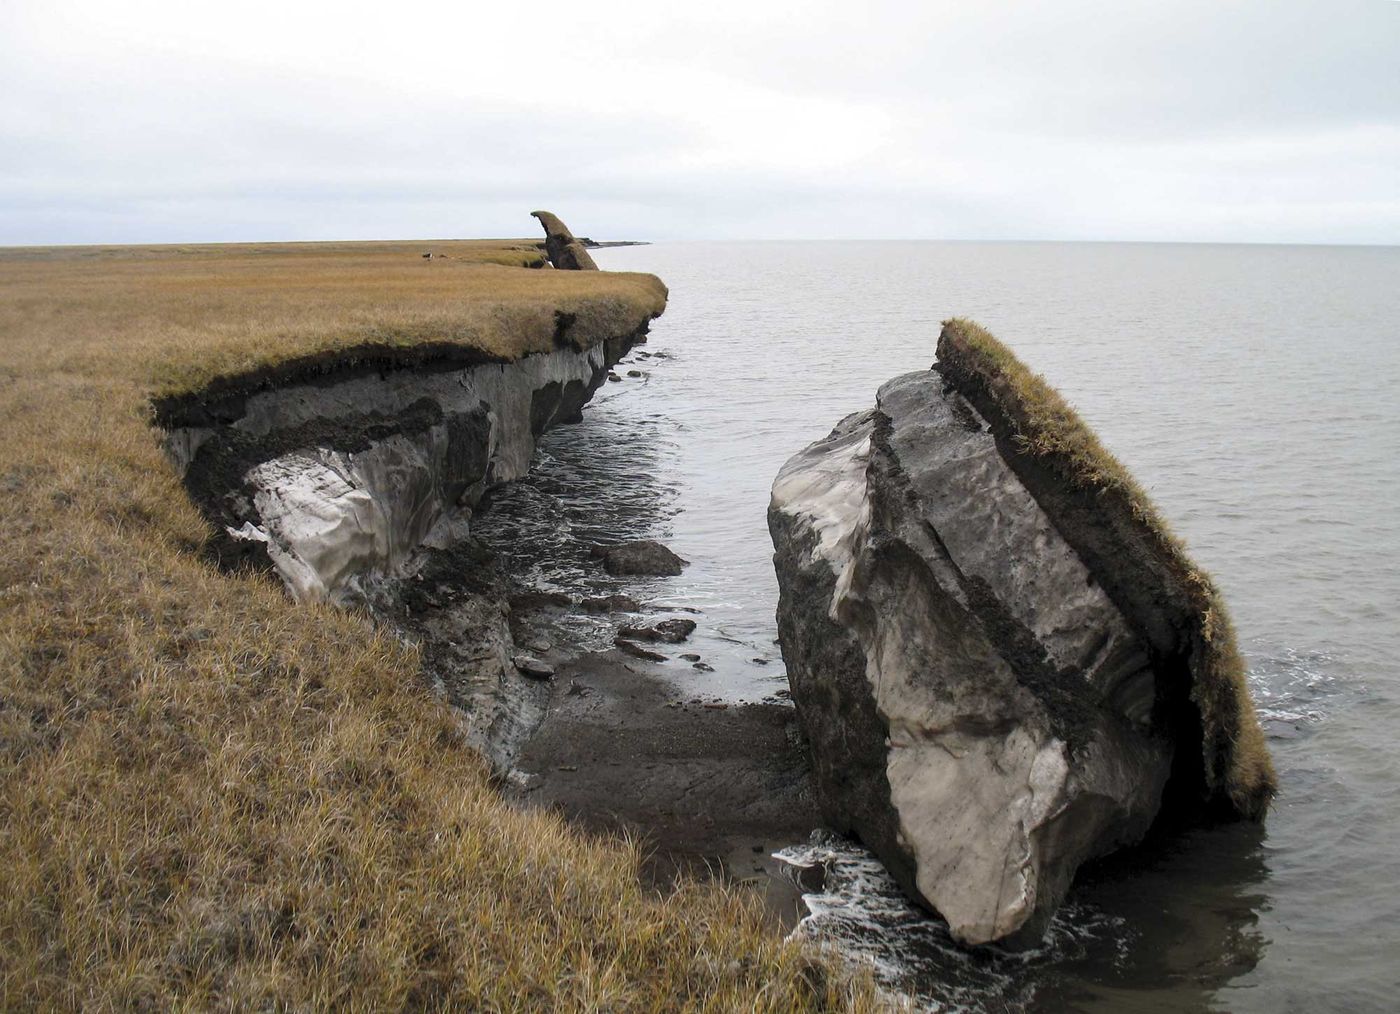 Thawing permafrost